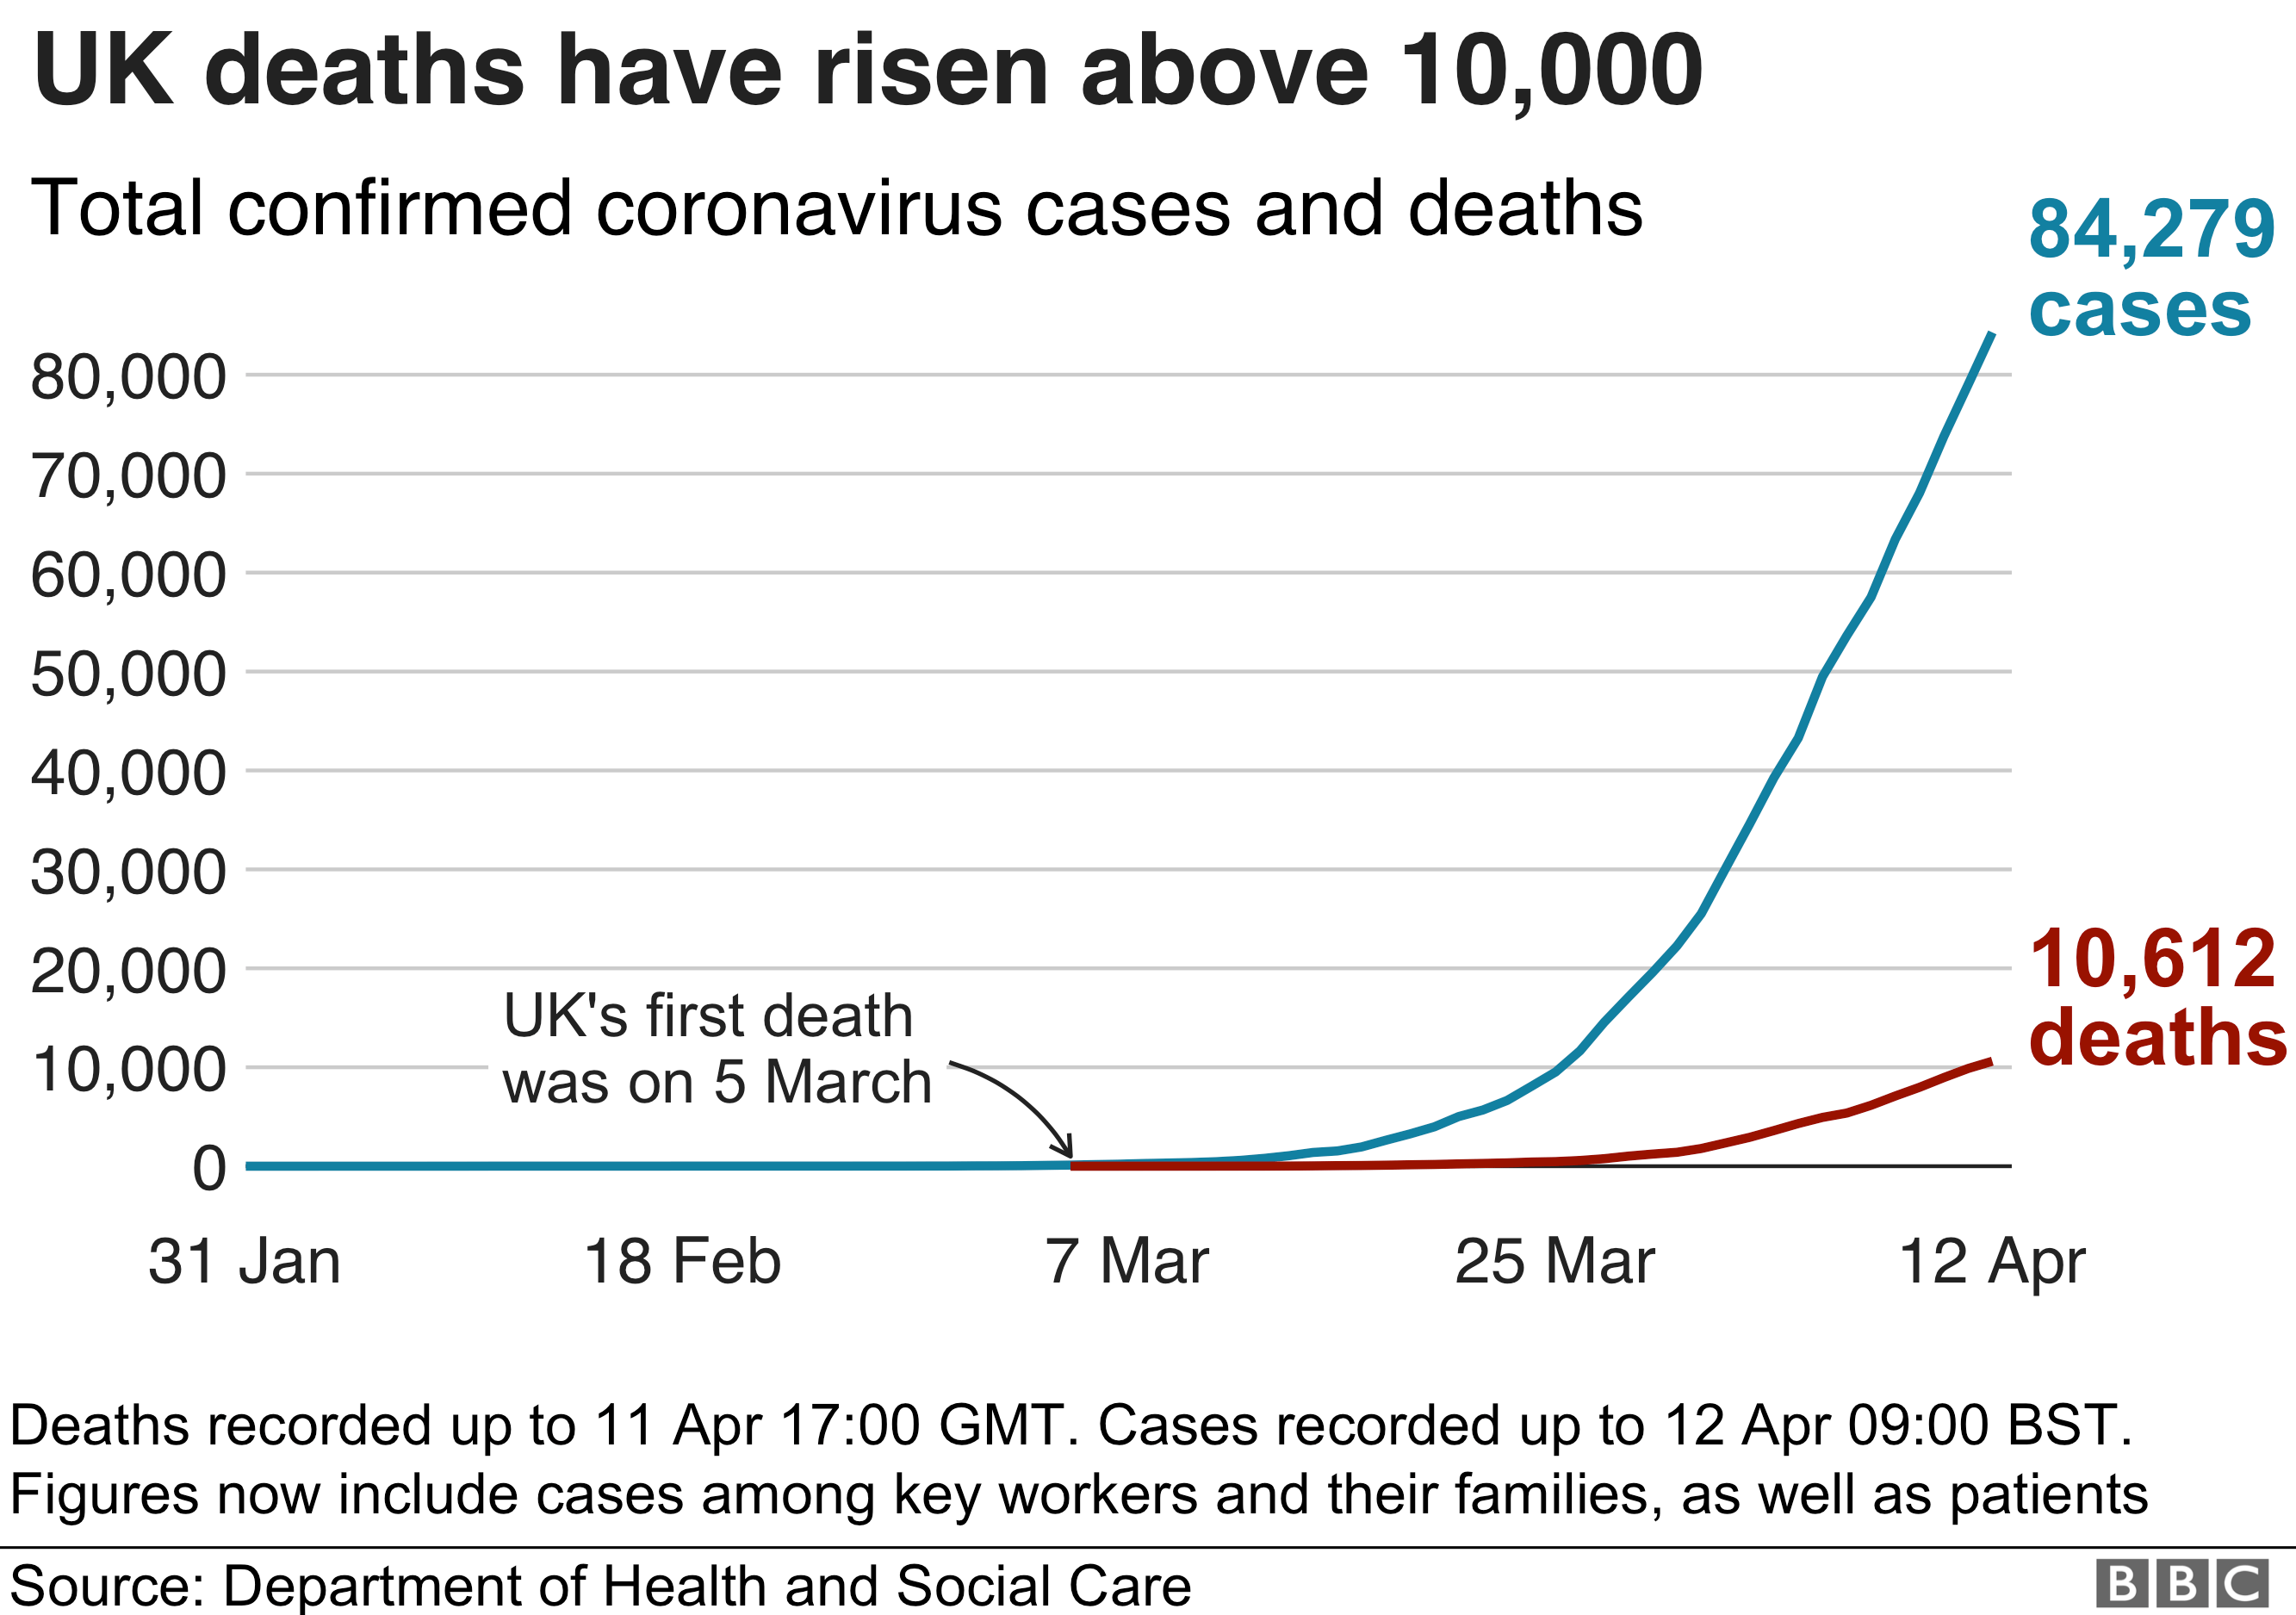 Graphic showing UK deaths